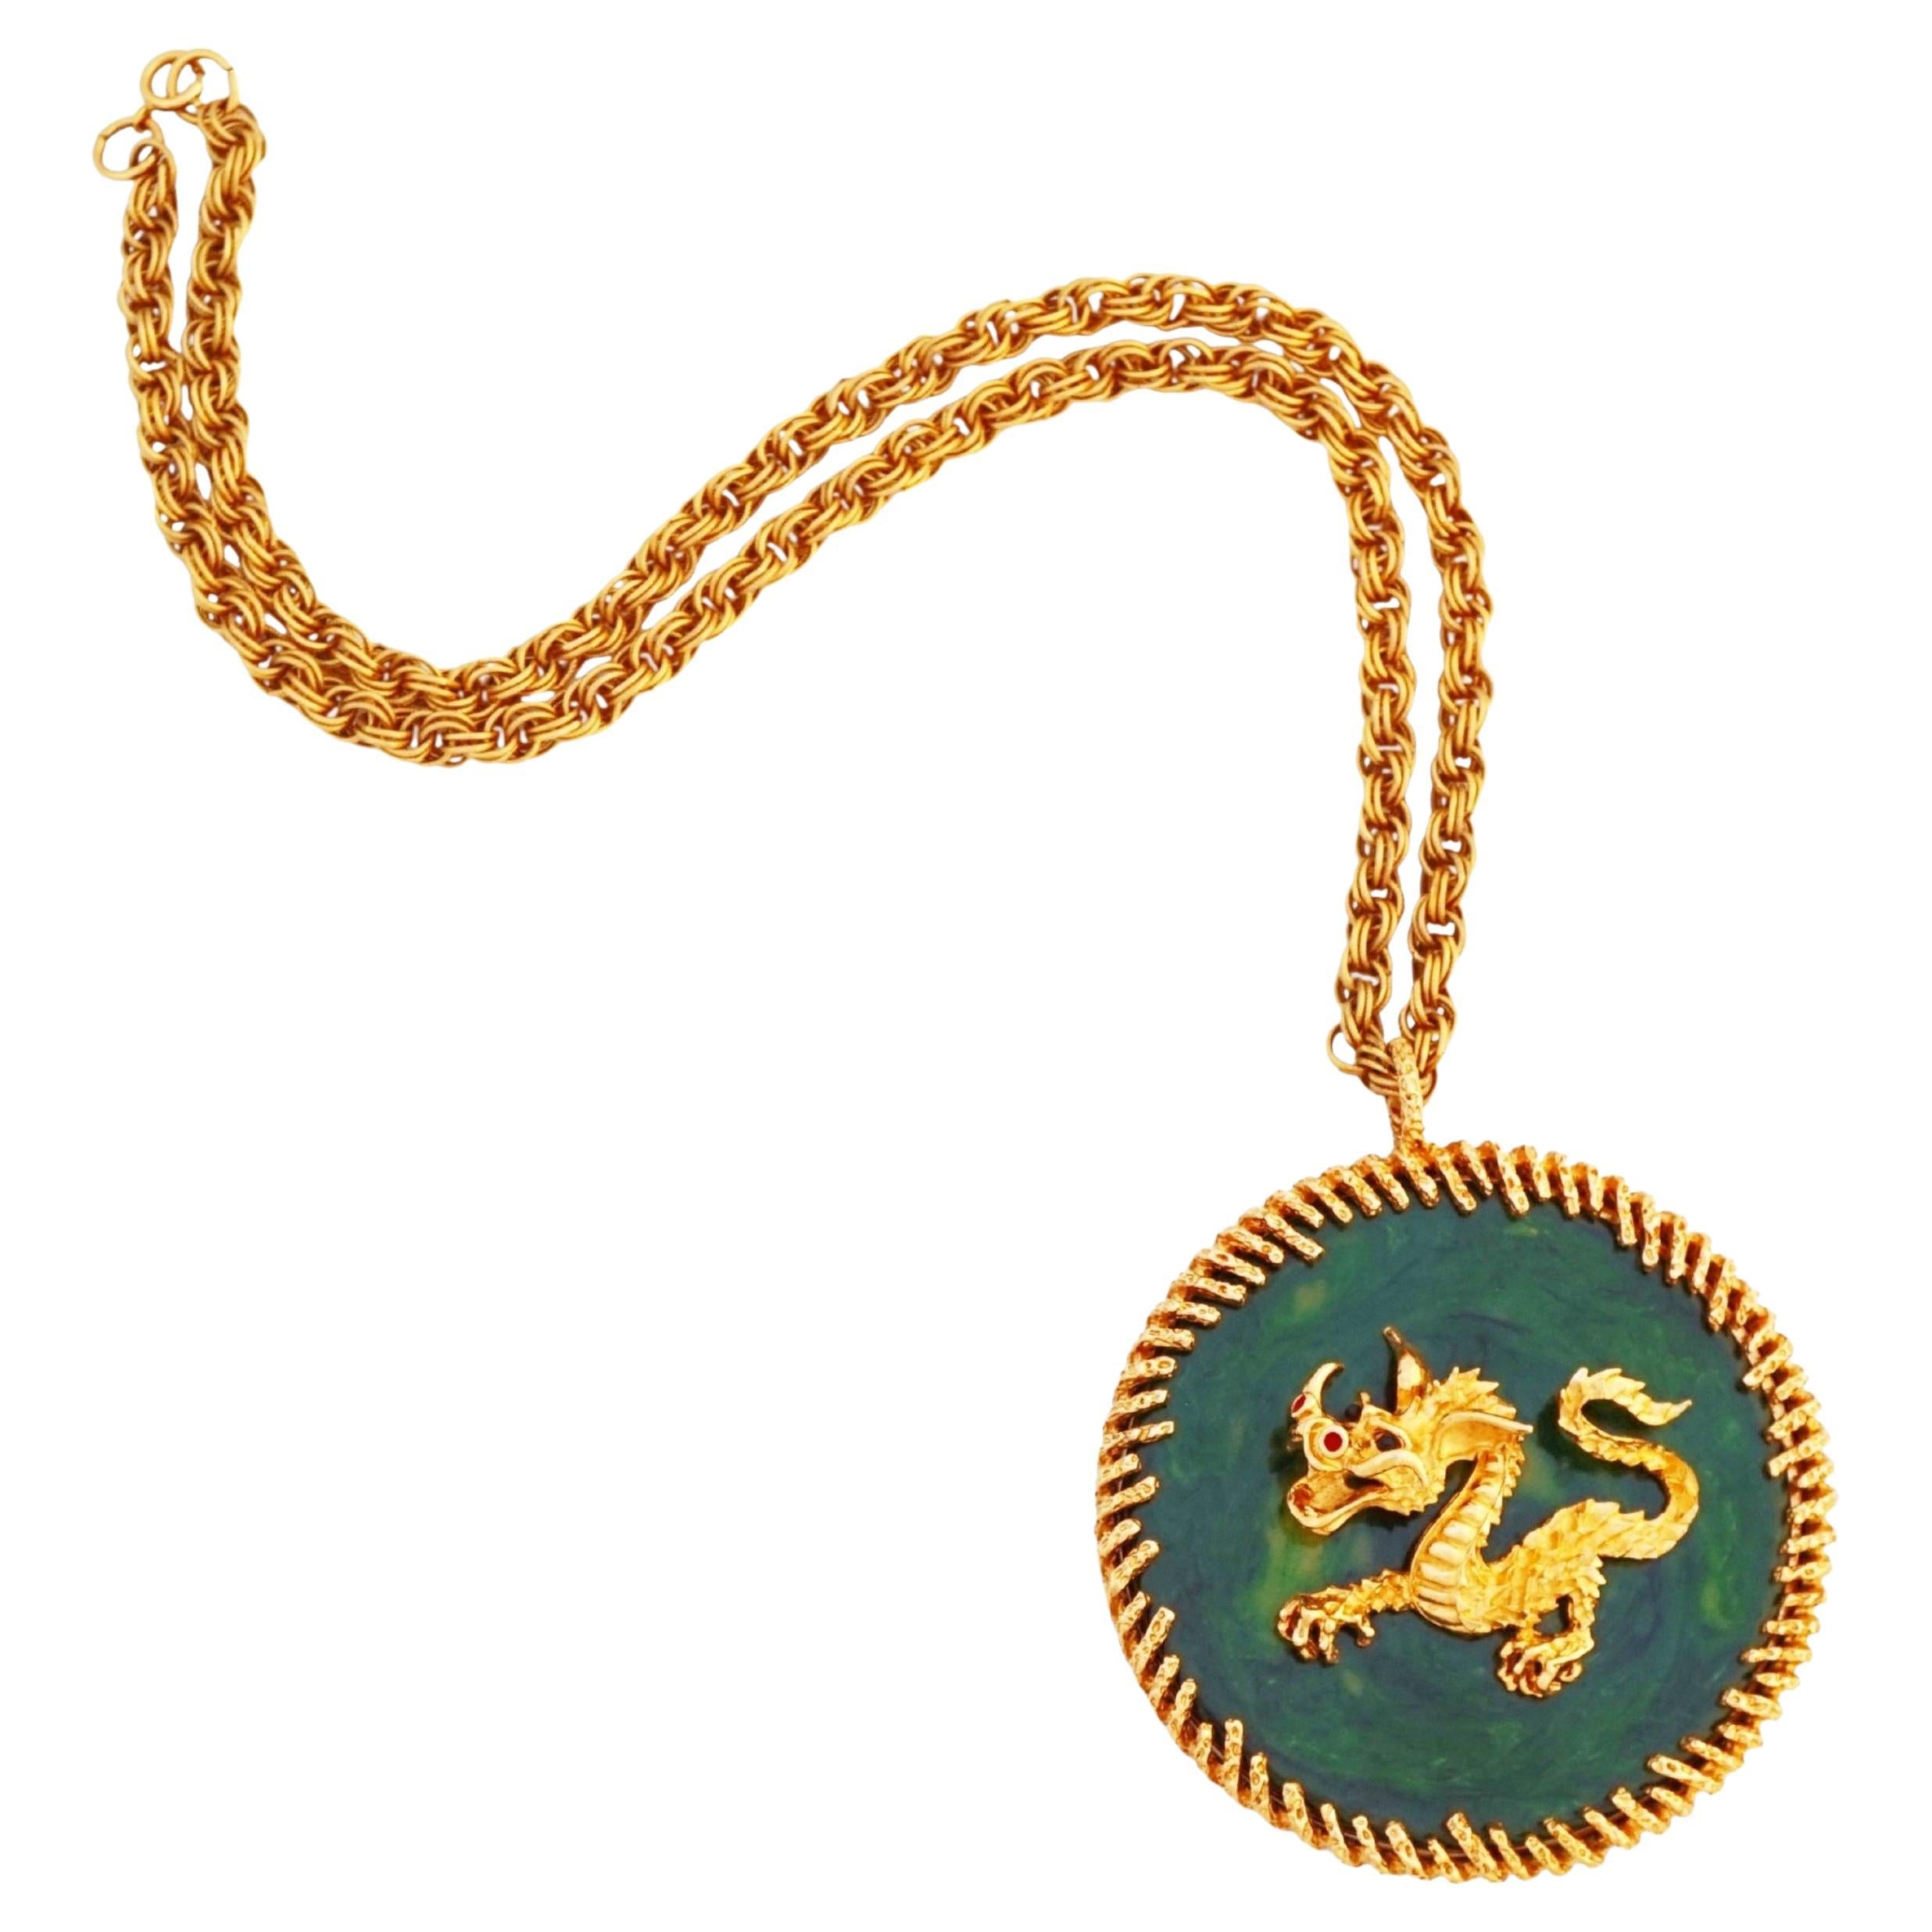 Massive Runway Jade Resin Dragon Pendant Necklace By Panetta, 1970s For Sale